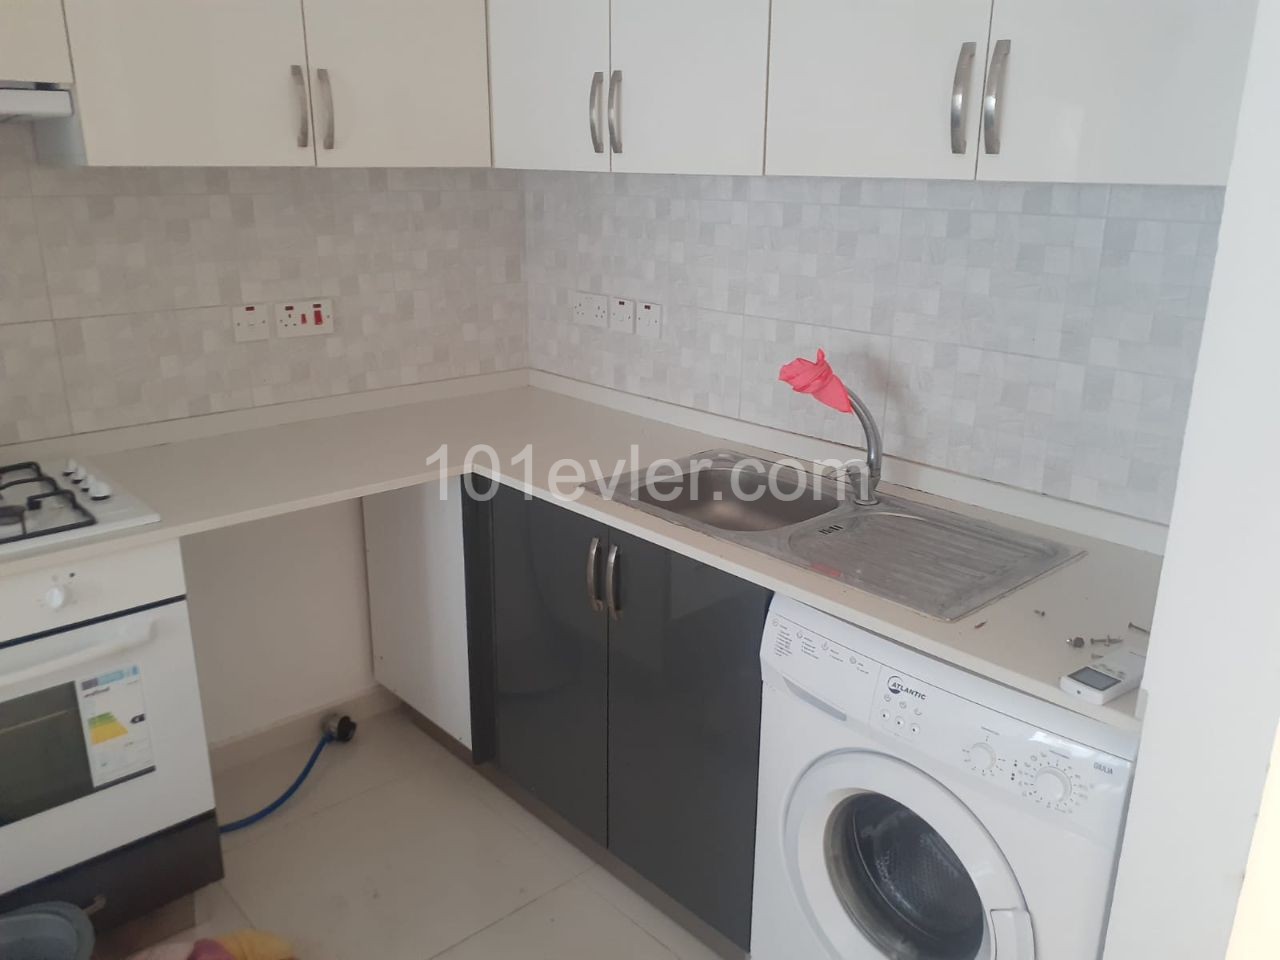 3+1 apartment for rent in center of Kyrenia. Kaşgar Court area.